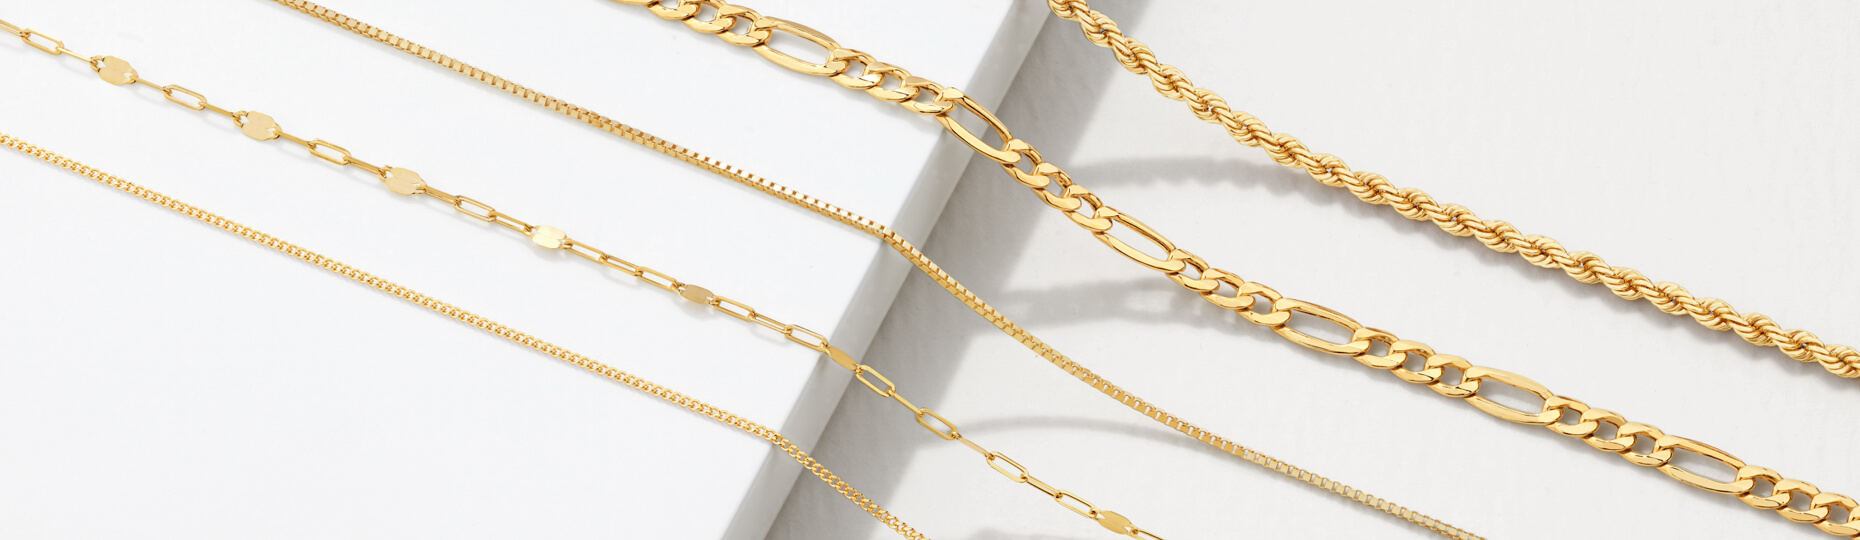 Solid 14k Yellow/Rose Gold or White Gold Flat Cable Link Chain 14k gold paperclip chain Sterling Silver Necklace 